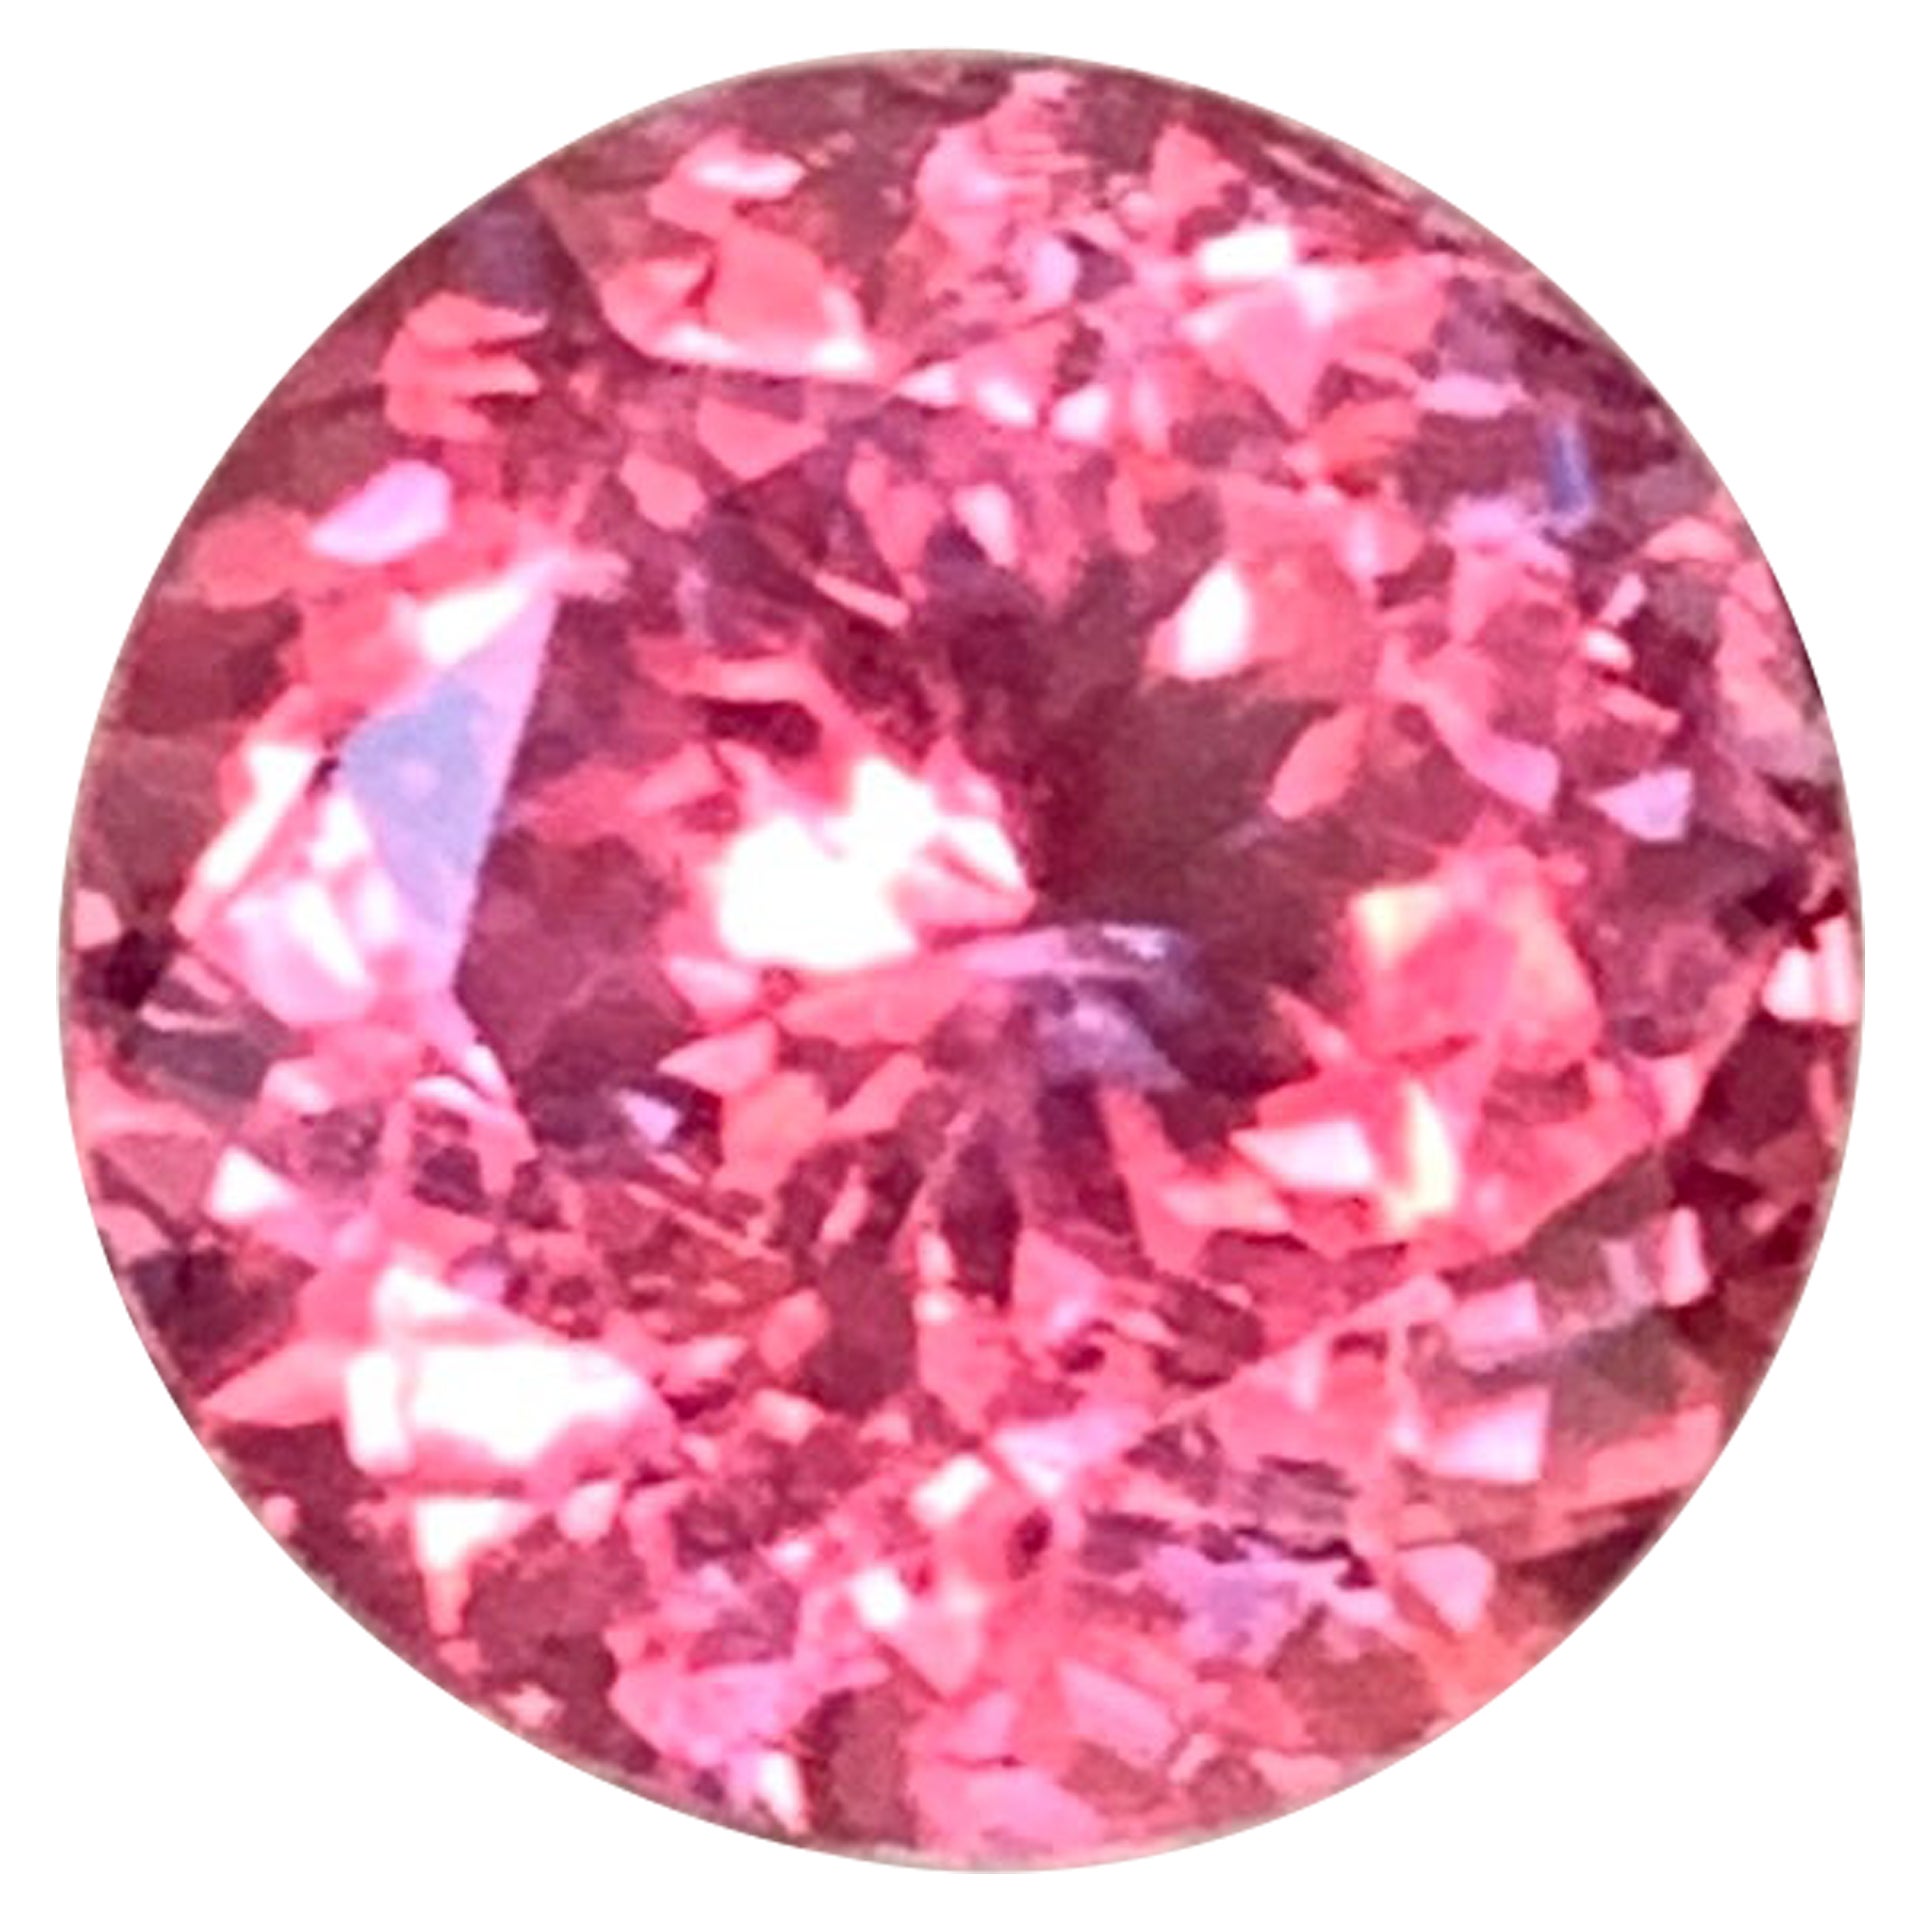 GIA Certified 2.27 Cts Incredibly Rare Pink-Orange Rhodochrosite Colorado Mine For Sale